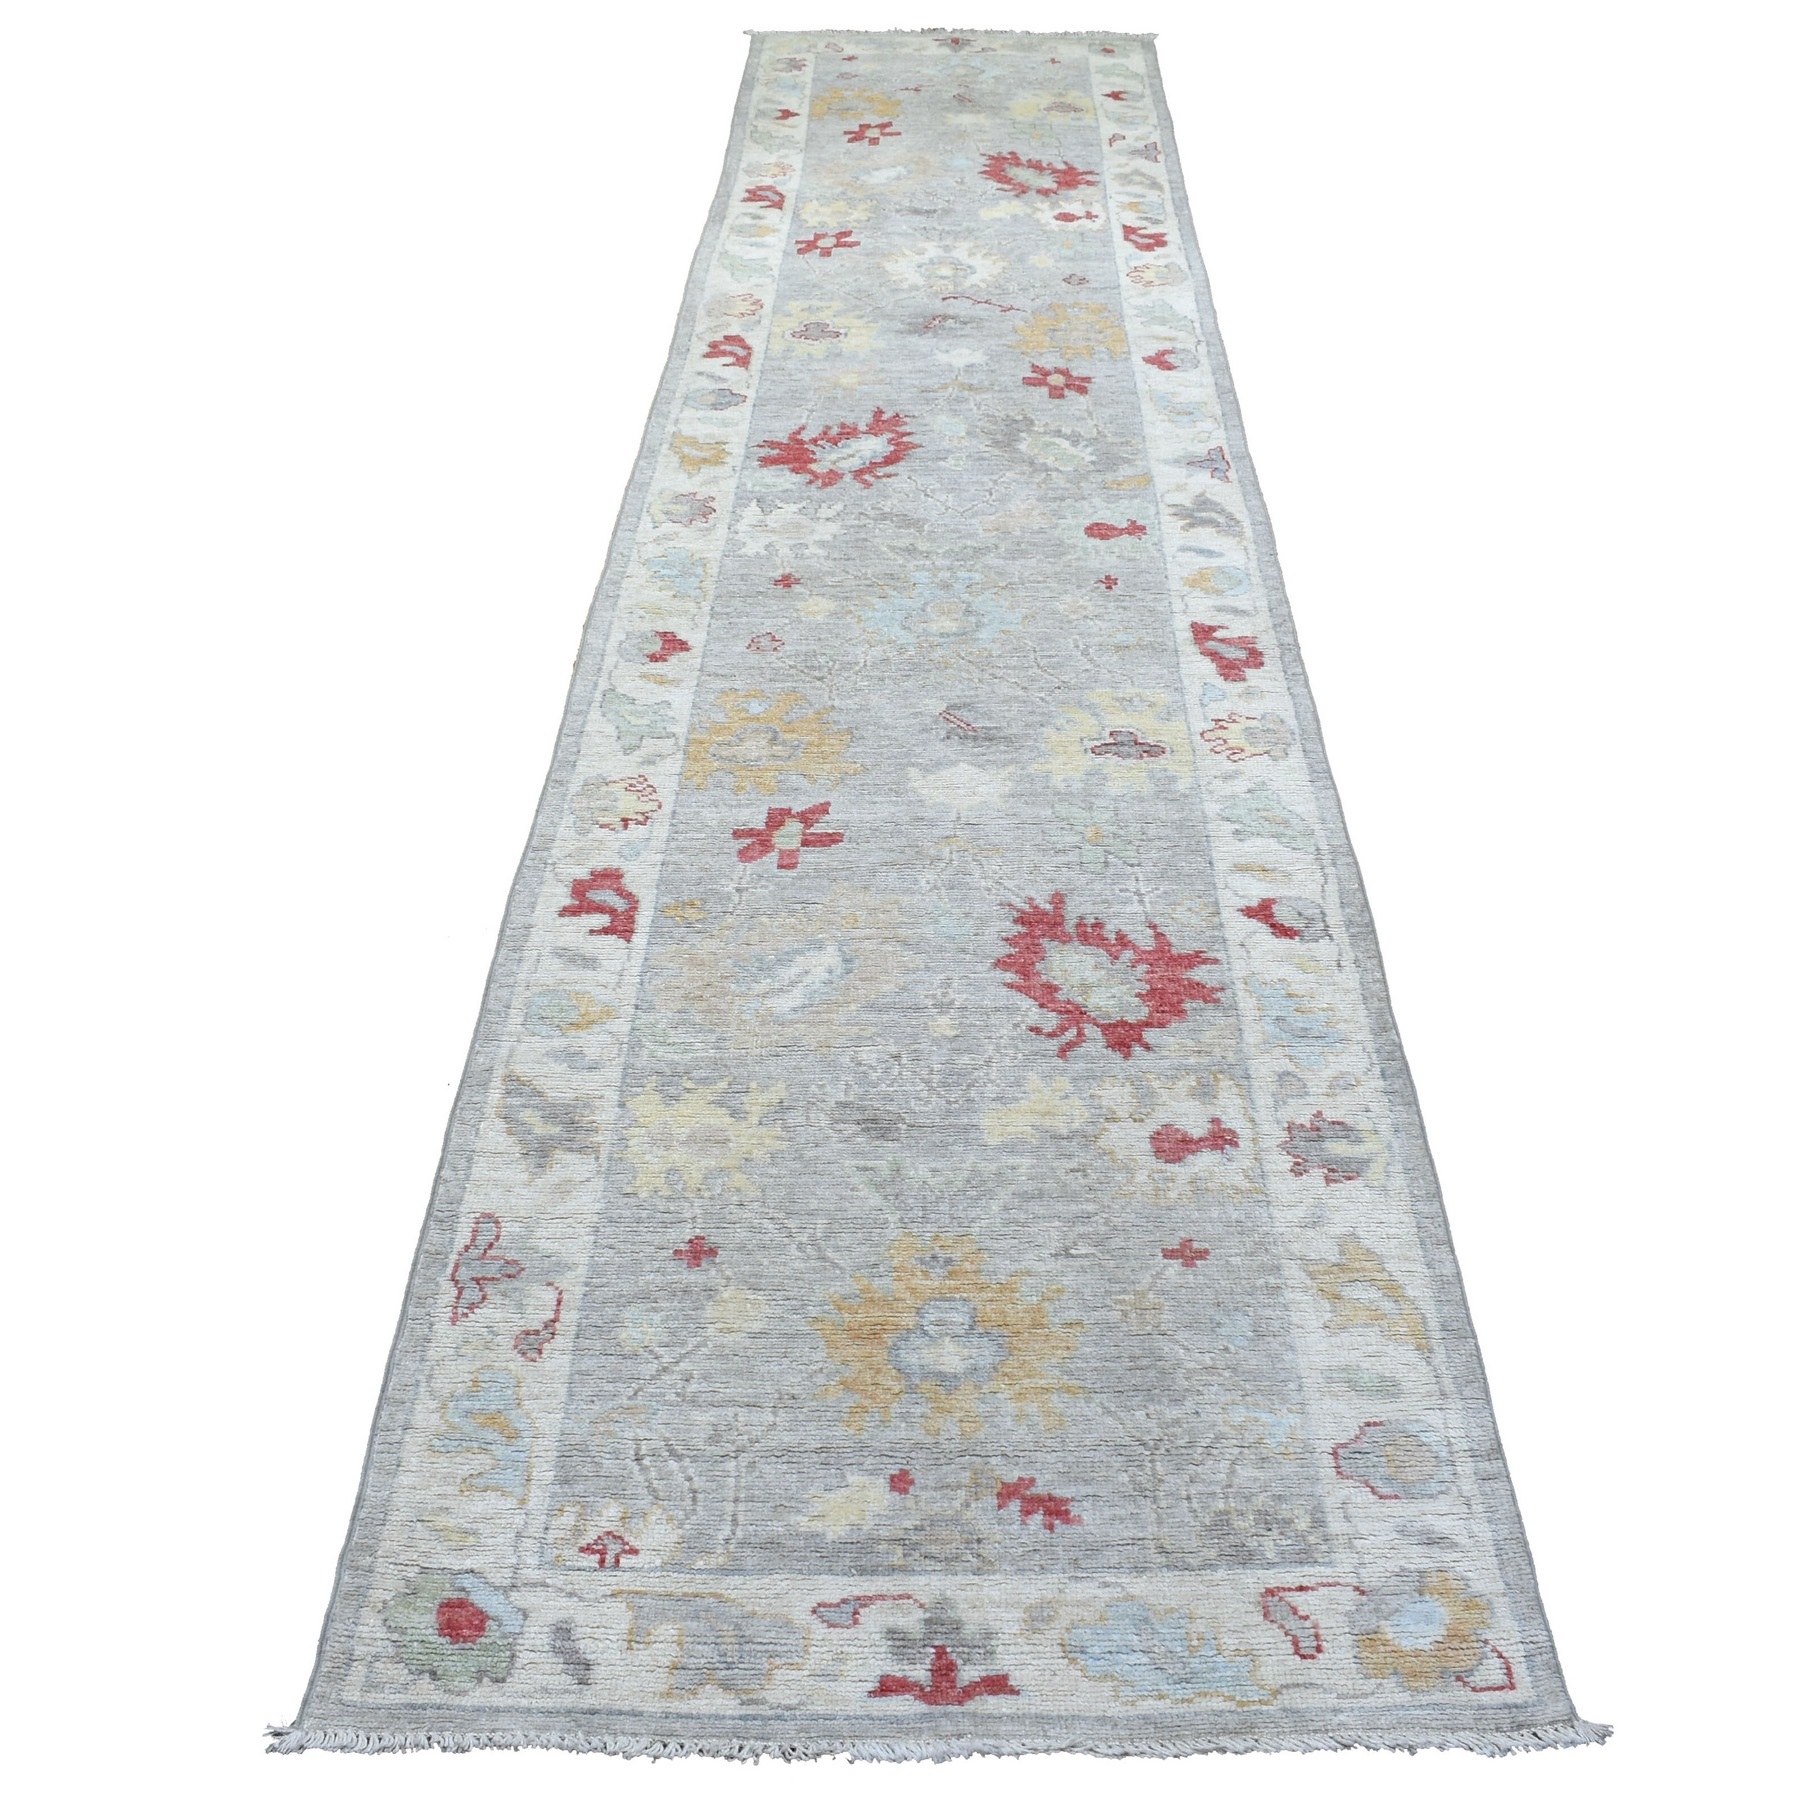 3'x13'5" Extra Soft Wool Gray Angora Oushak with Pop of Red and Yellow Hand Woven Oriental Wide Runner Rug 